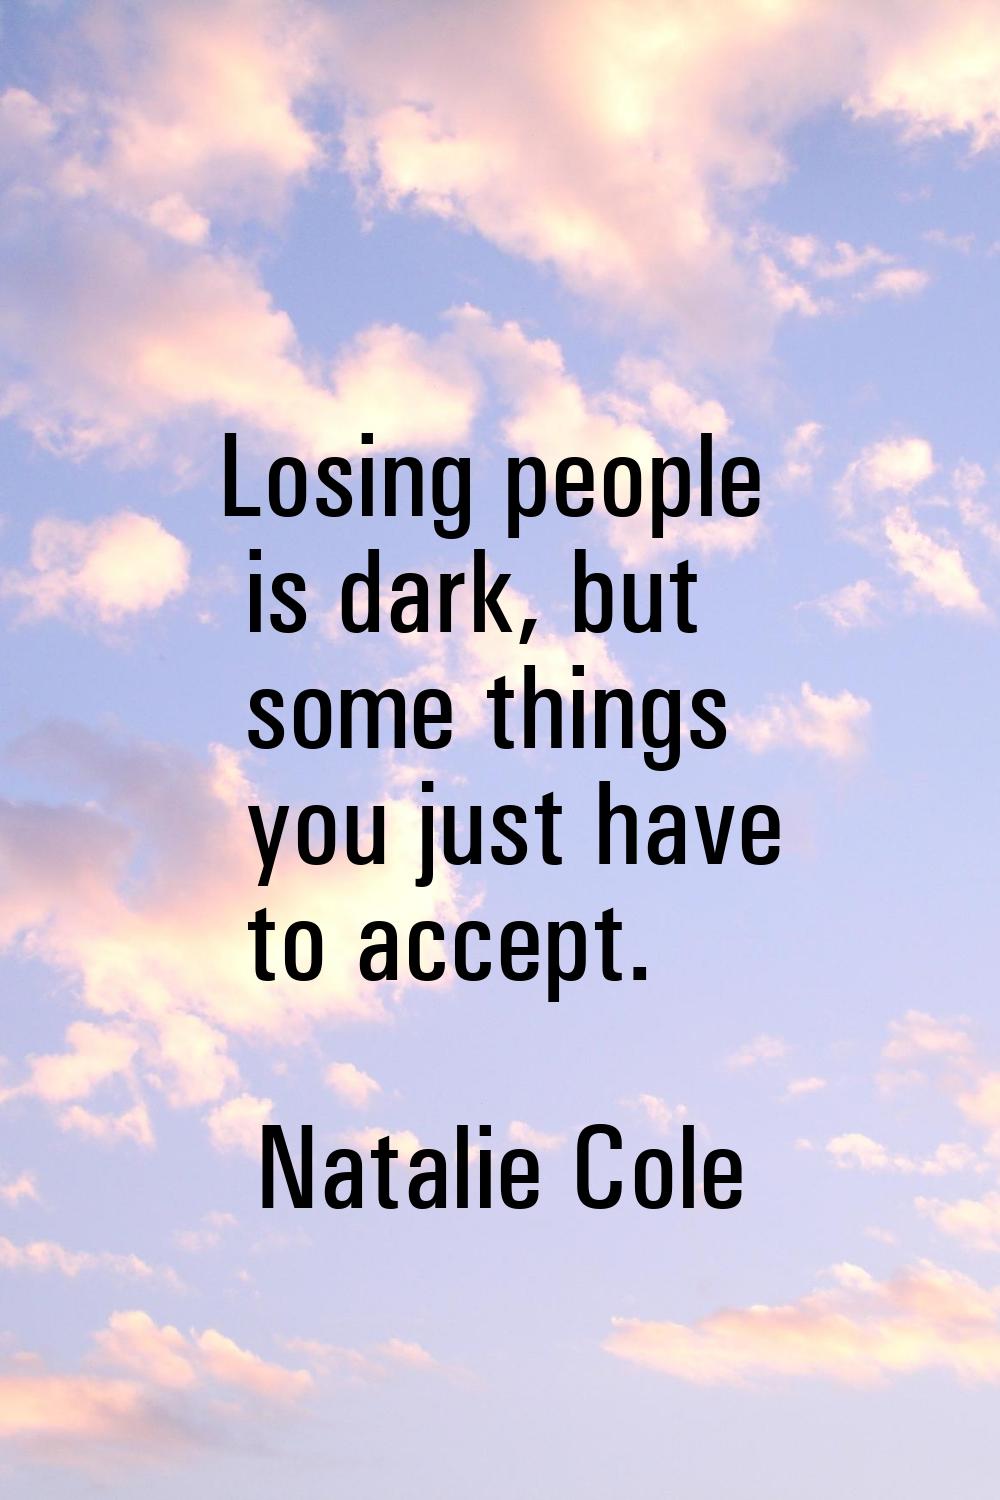 Losing people is dark, but some things you just have to accept.